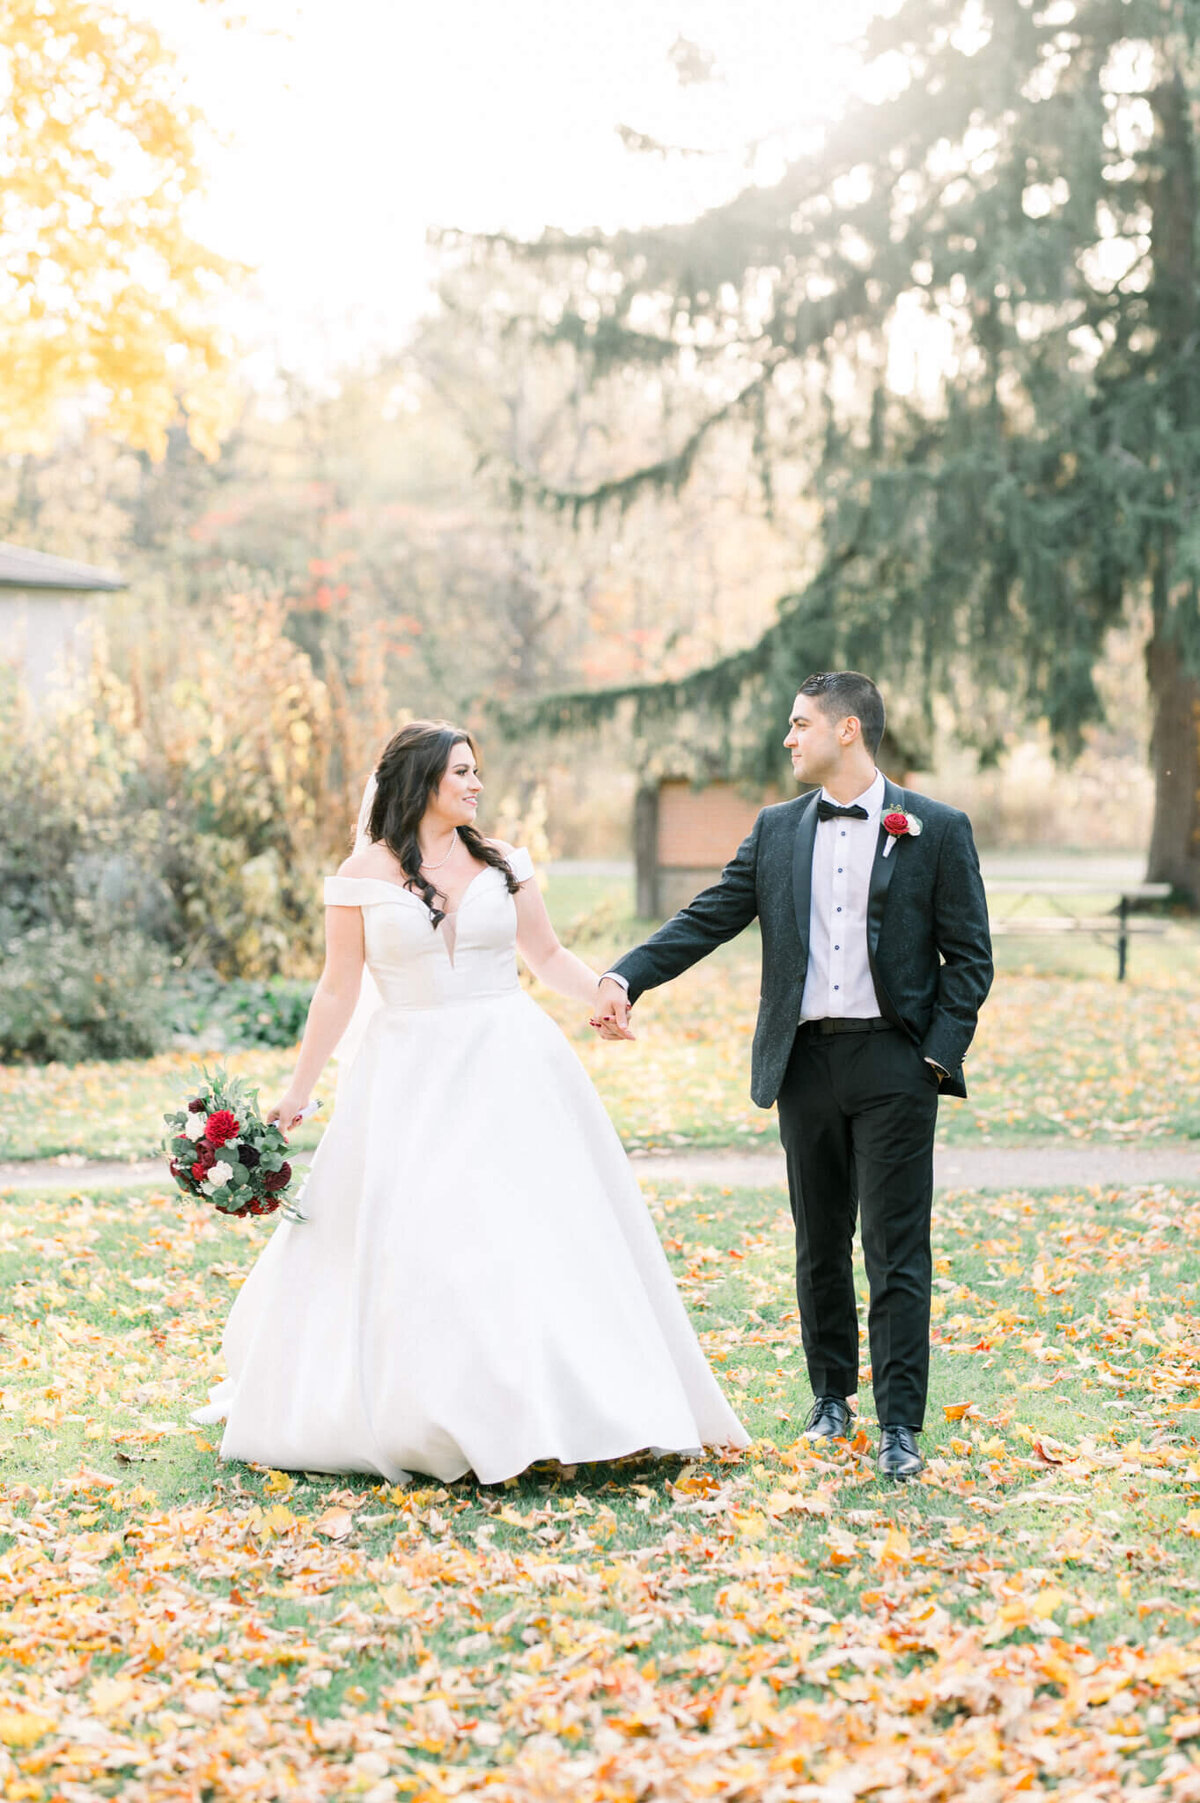 Bride and groom walking holding hands in the Fall. Captured by Niagara wedding photographer